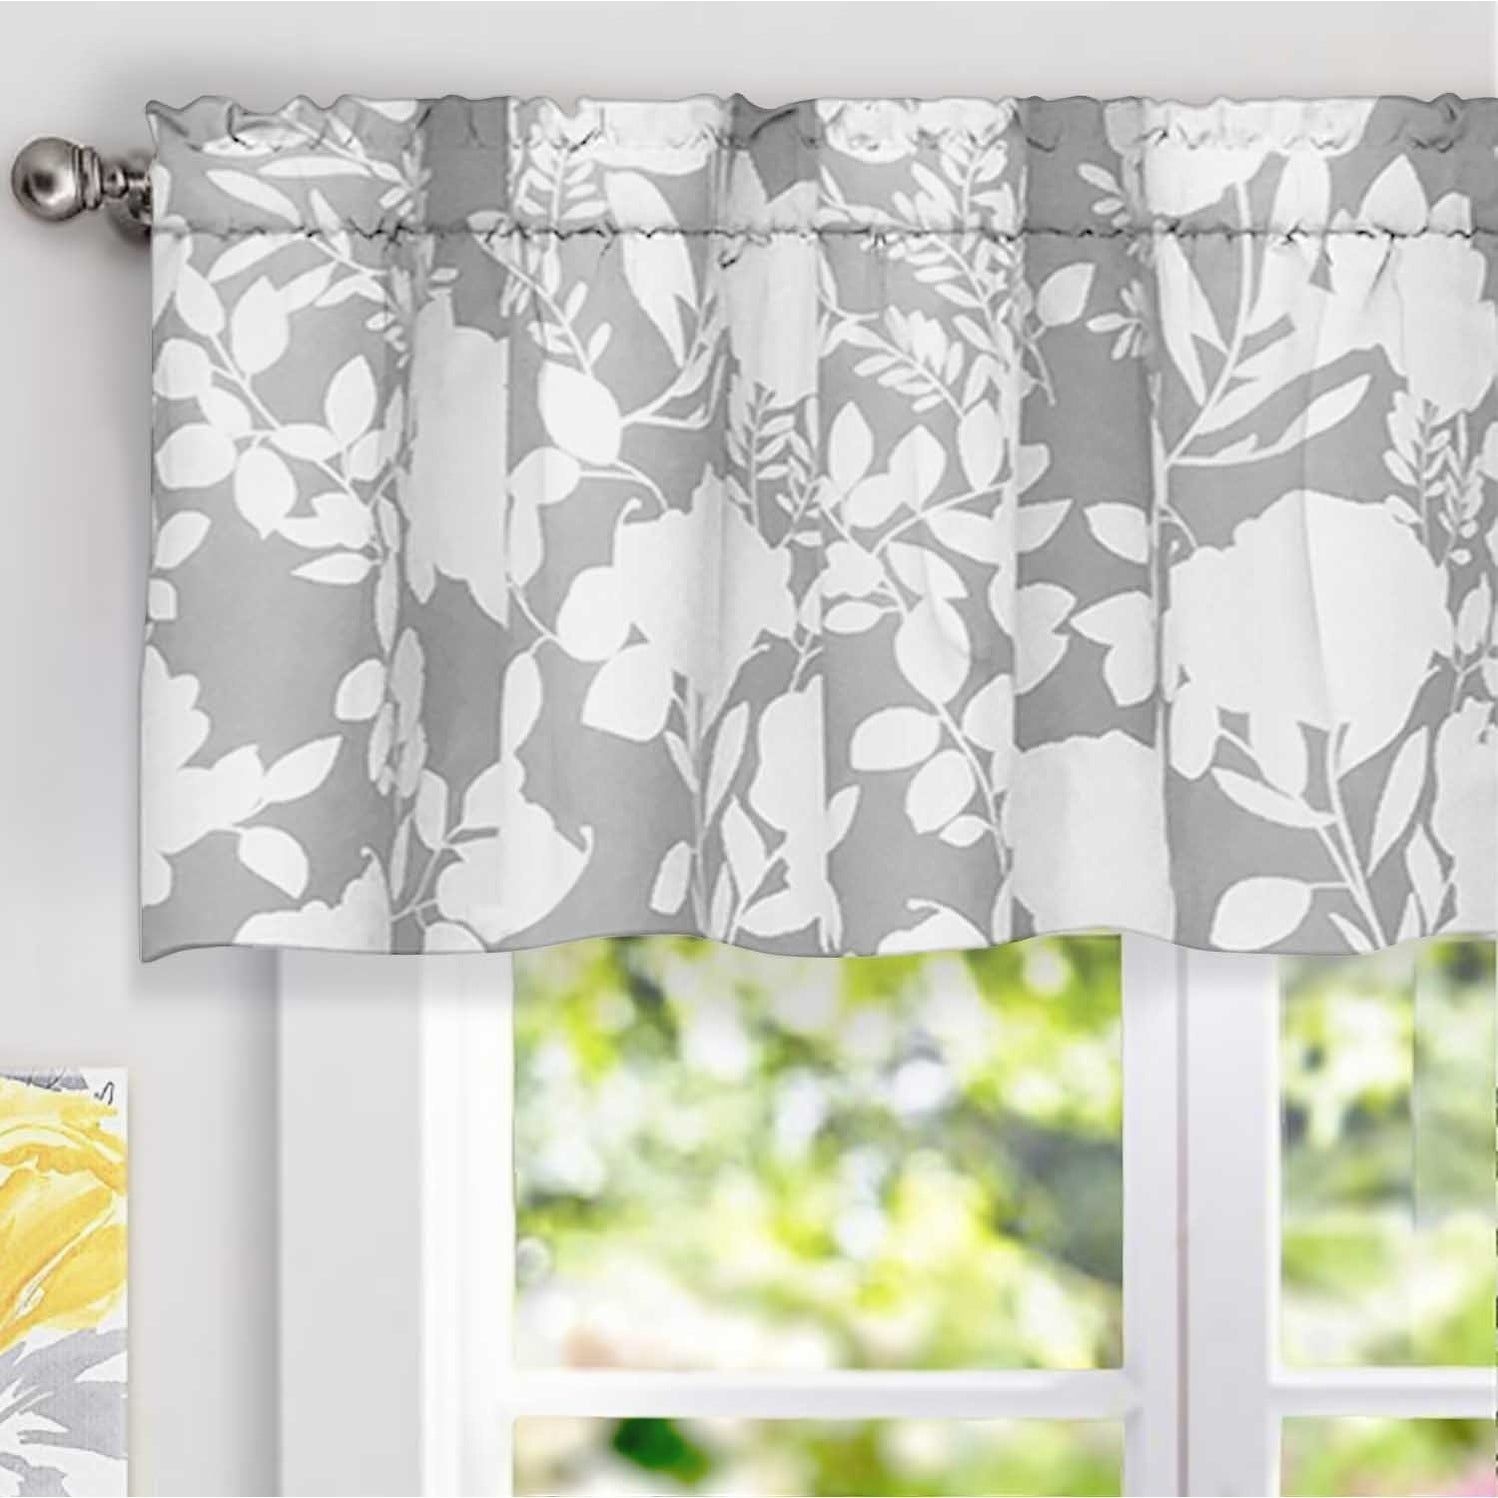 Details About Driftaway Floral Delight Botanic Pattern Window Valance – 52 Pertaining To Floral Pattern Window Valances (View 3 of 20)